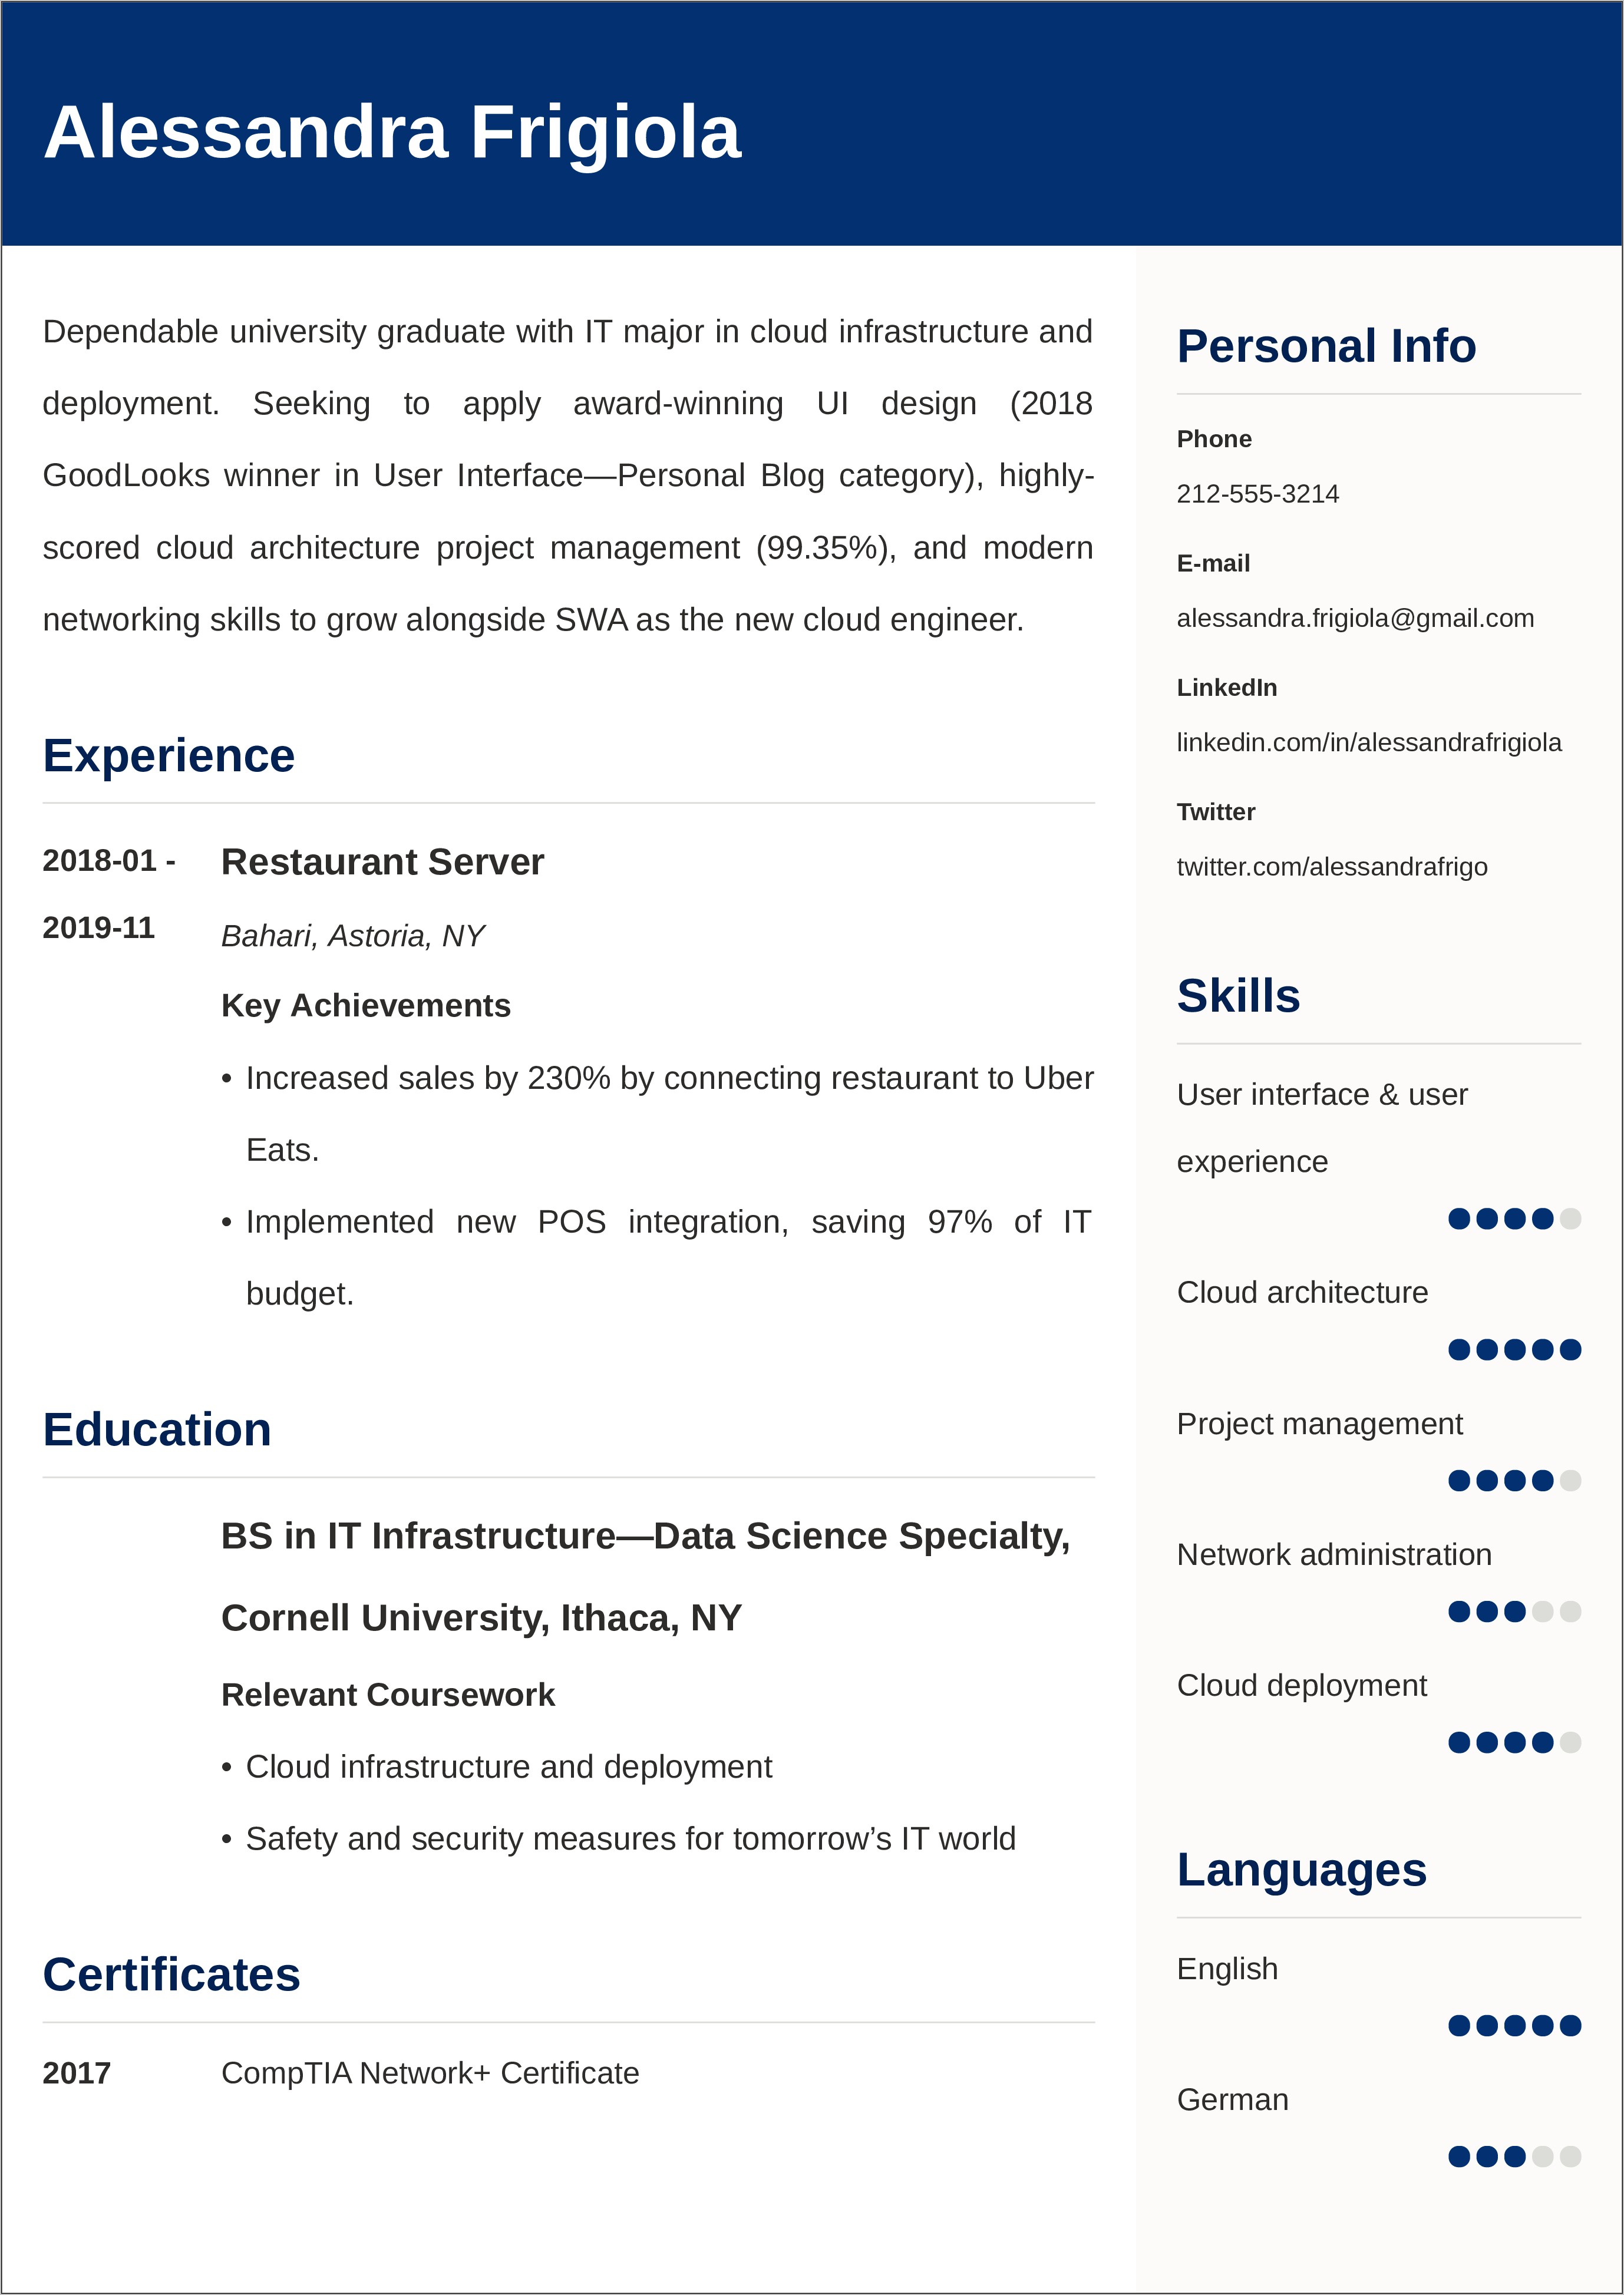 Objective For Resume Entry Level Computer Science